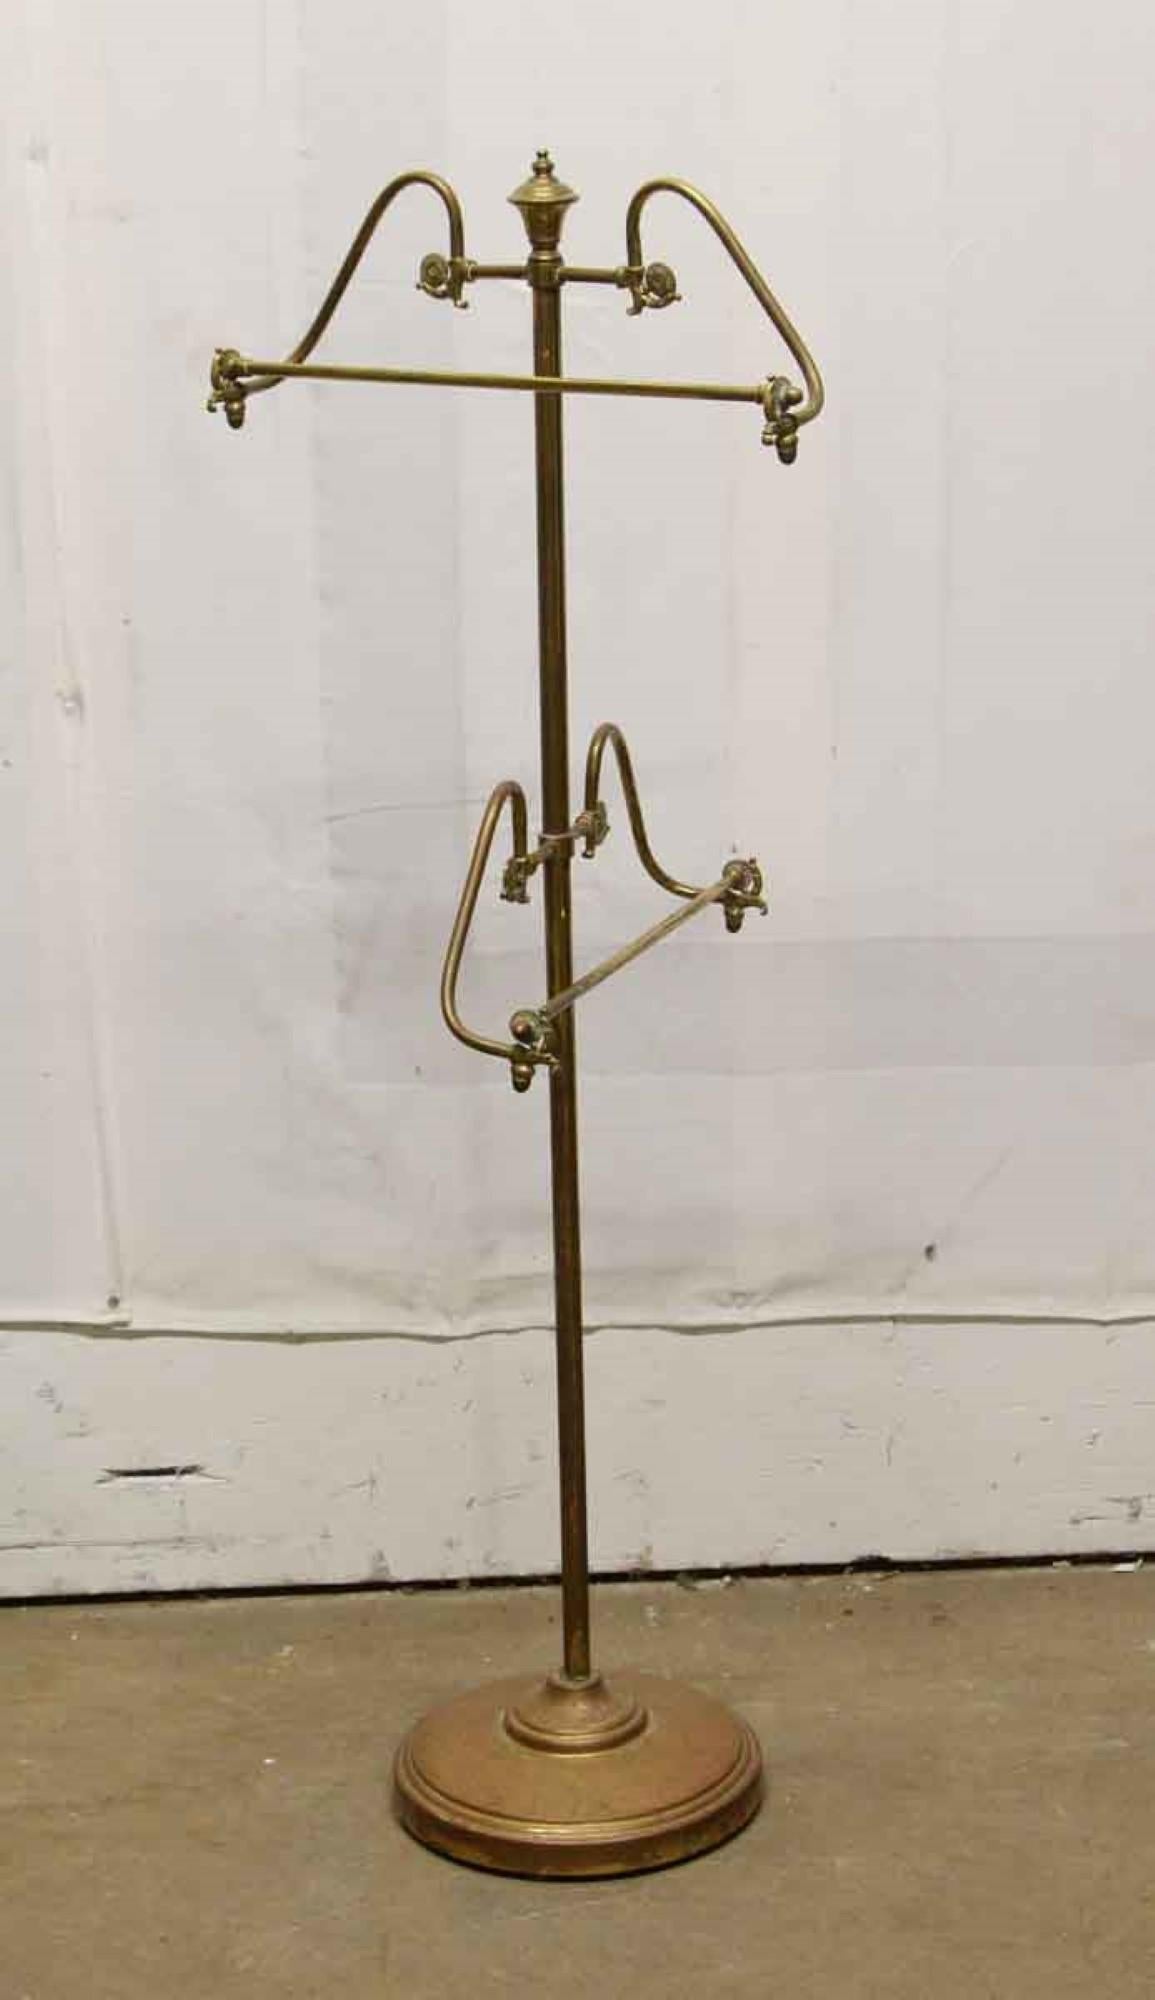 1960s bass valet for men's shirts and suits with decorative cast brass details original patina. Features 2 racks for panrs, suits and shirts. Sometimes called a 